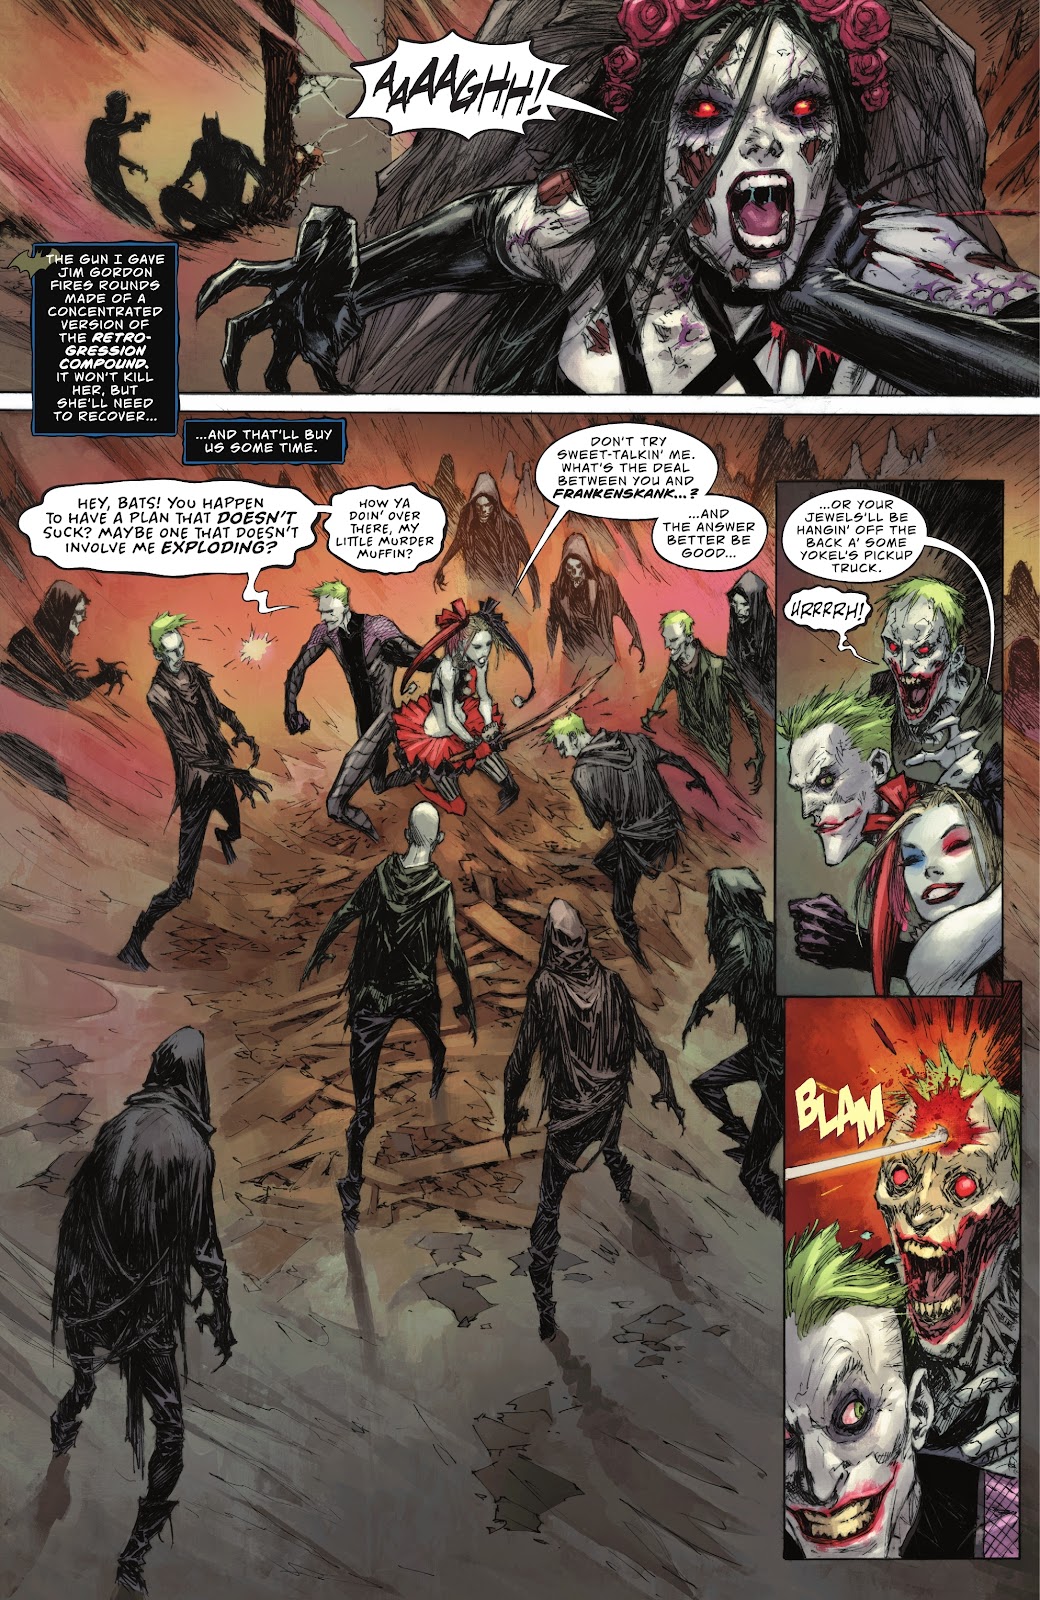 Batman & The Joker: The Deadly Duo issue 6 - Page 17